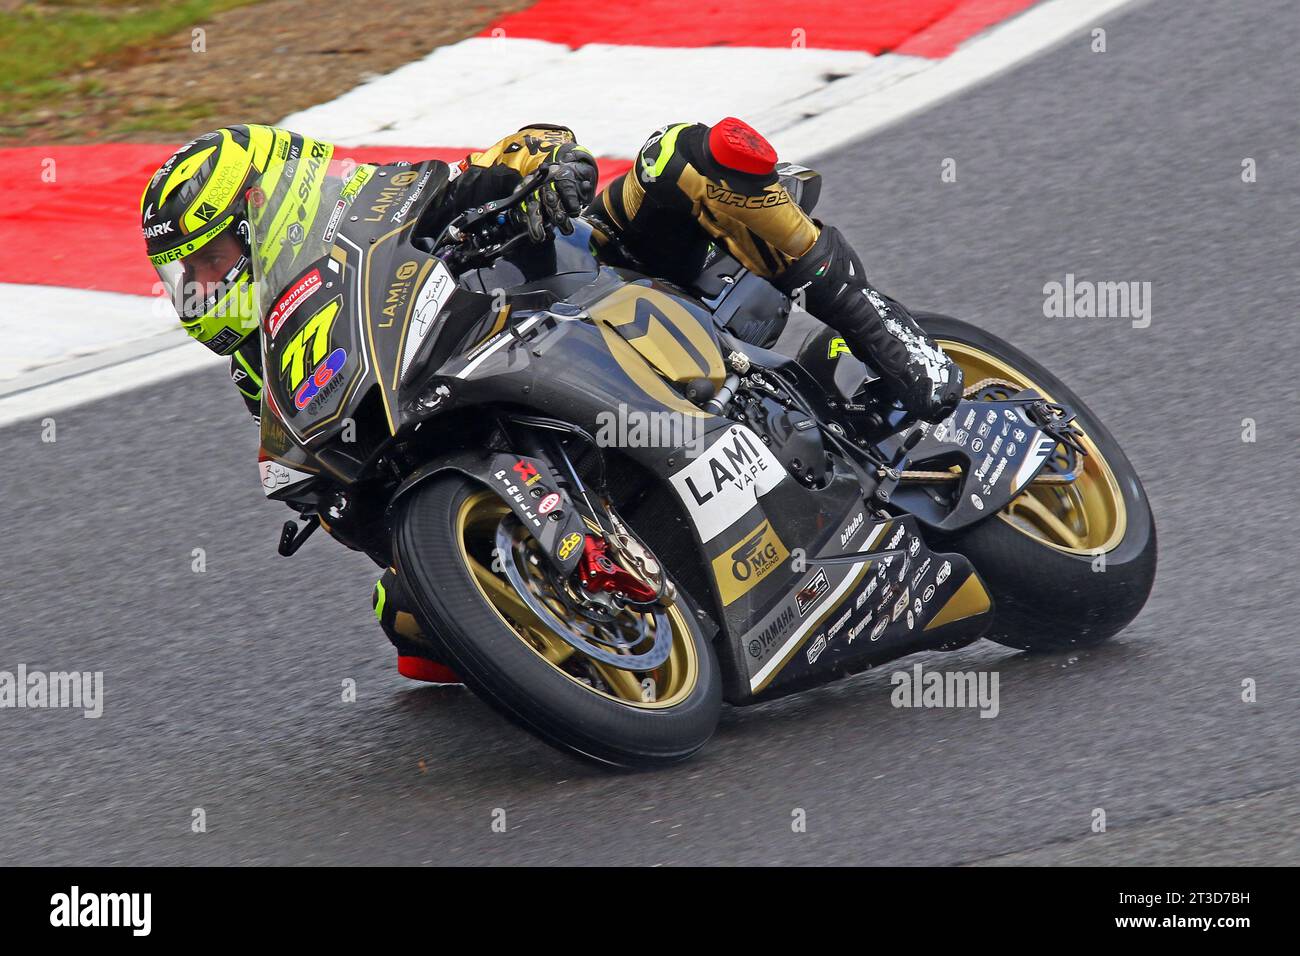 Kyle Ryde - LAMI OMG Racing Yamaha - in sella a Yamaha 77 nelle 2023 Superbike britanniche a Brands Hatch nell'ottobre 2023 Foto Stock